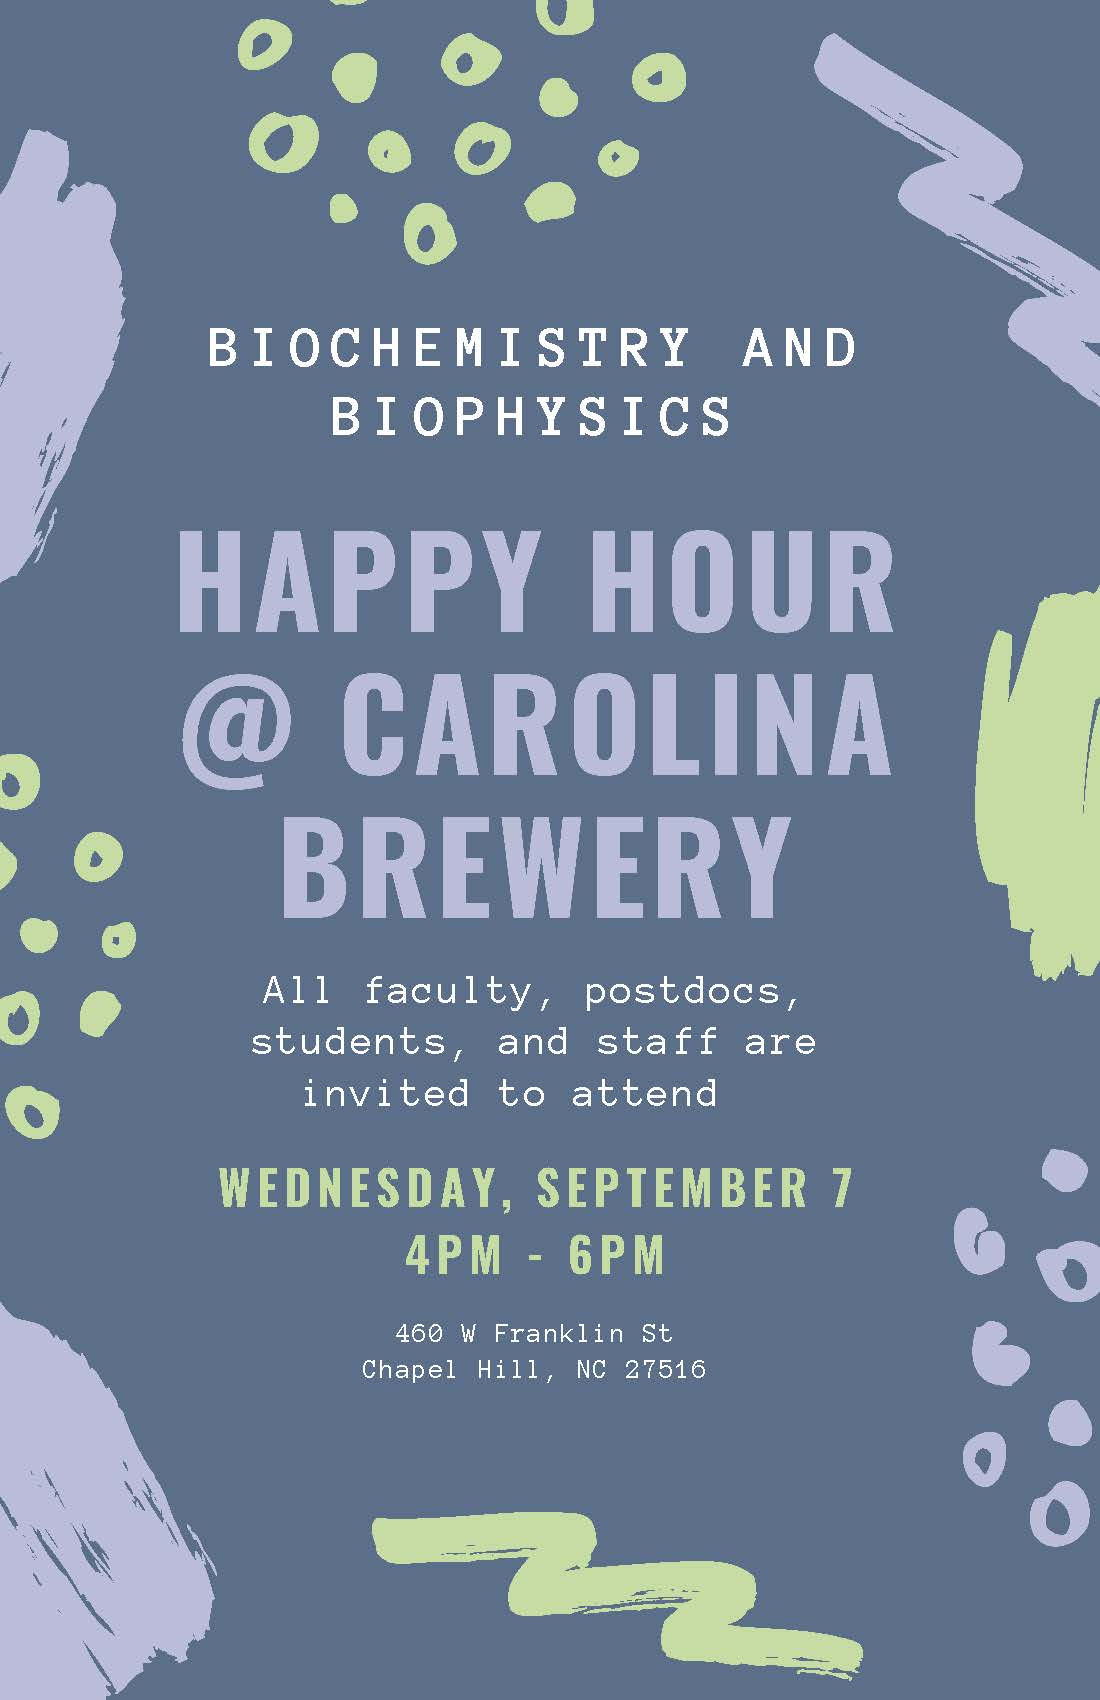 biochemistry and biophysics fall social is a happy hour at Carolina Brewery 9/7/22 from 4-6pm